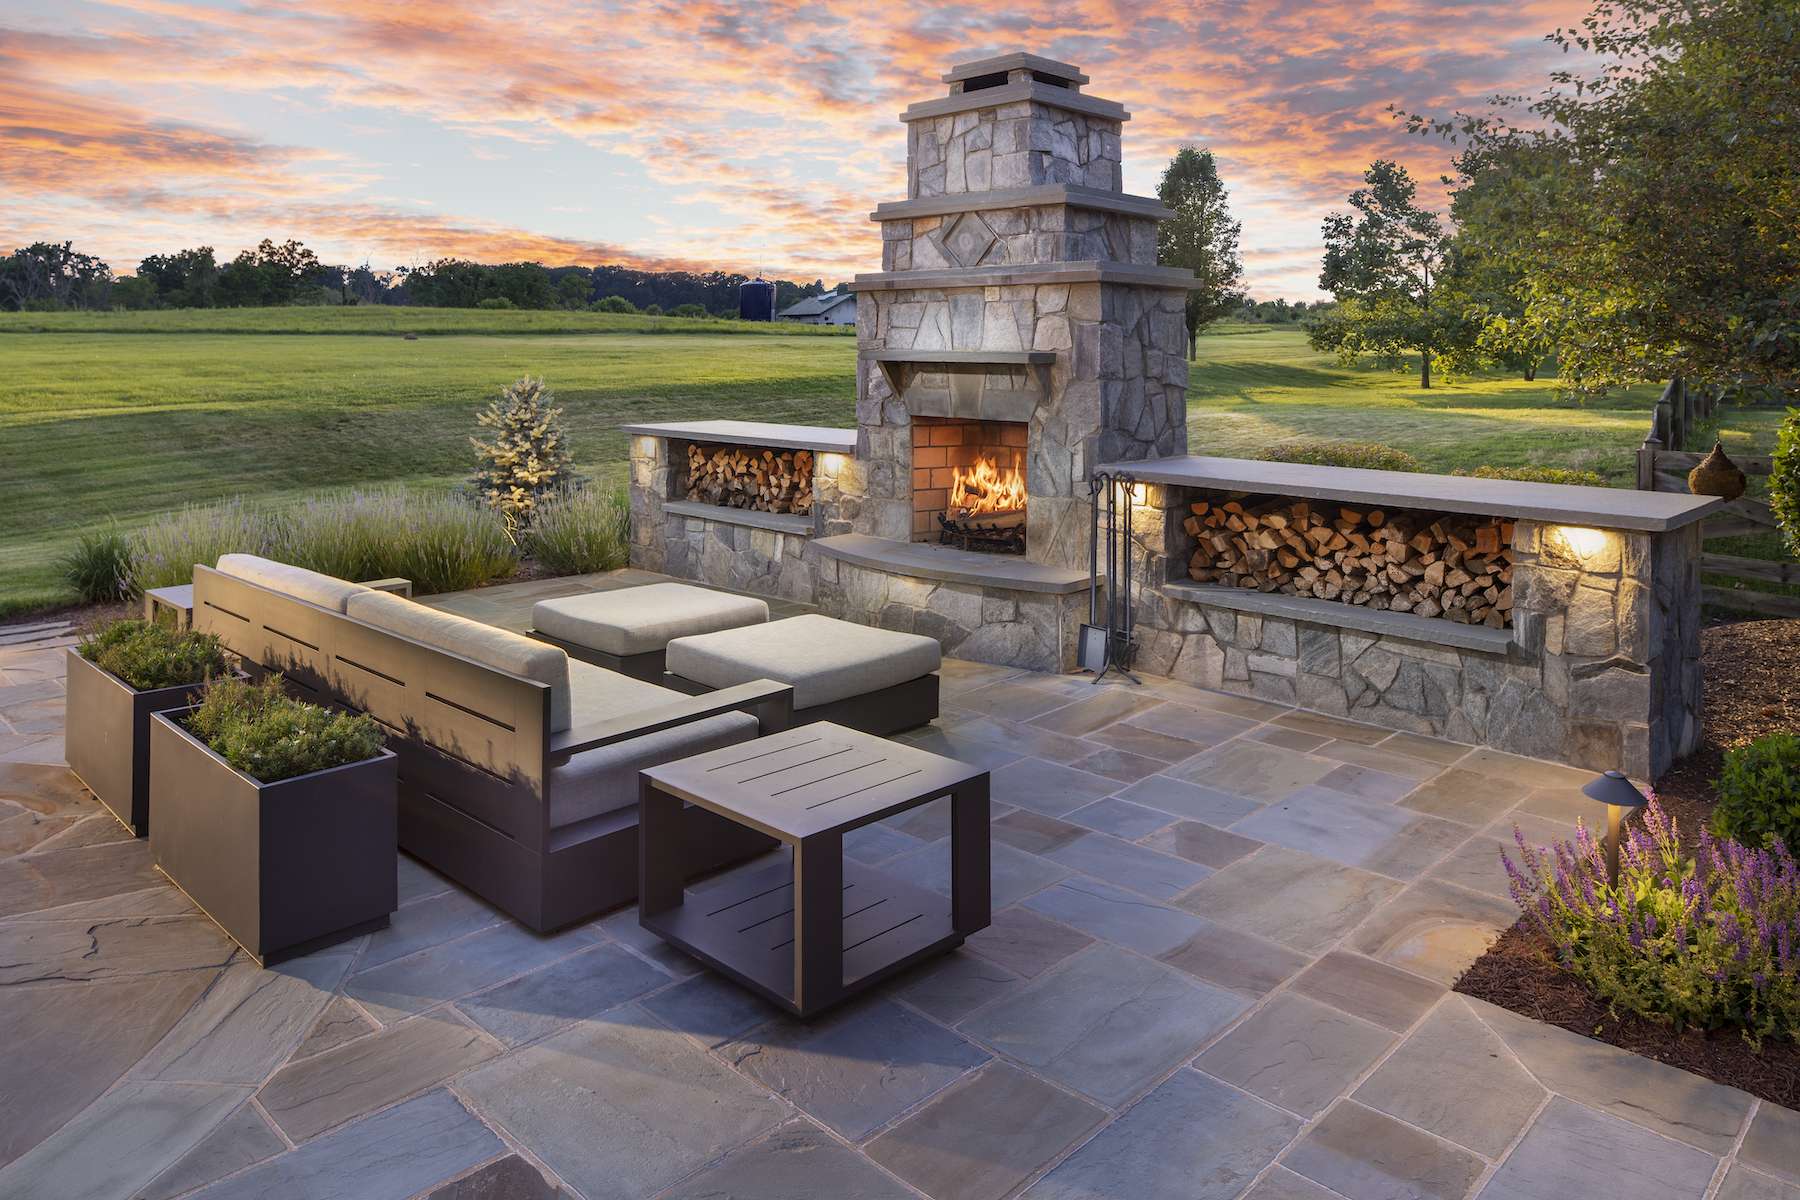 Outdoor fireplace and patio